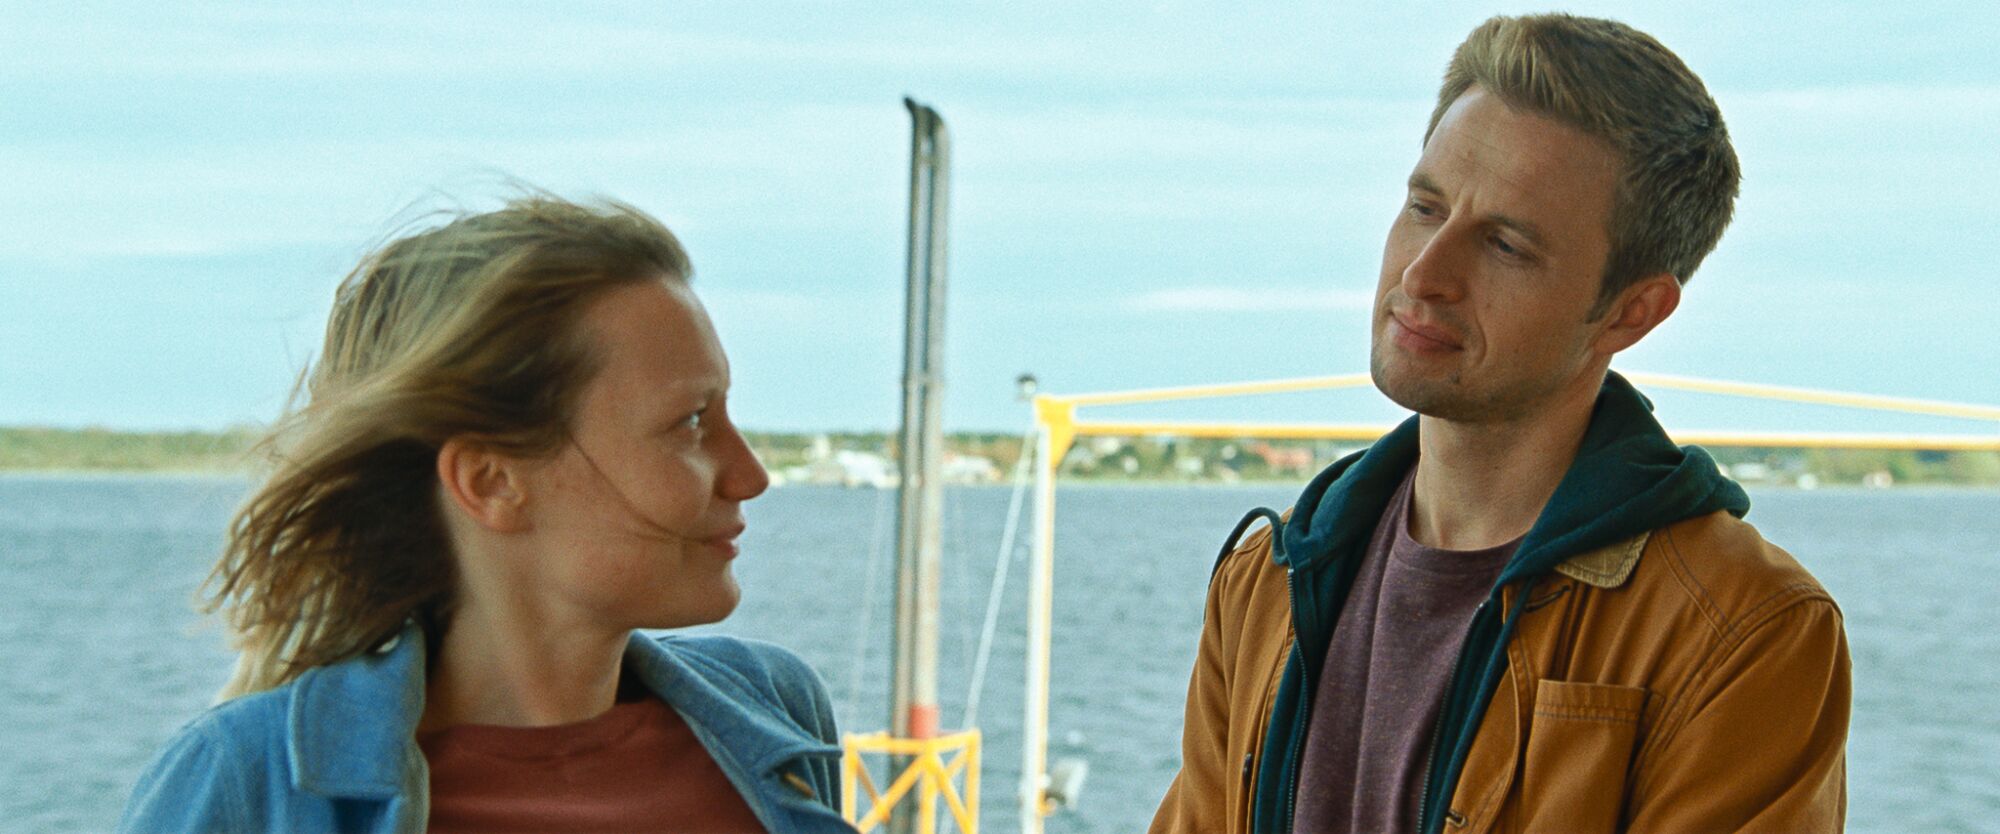 Mia Wasikowska as Amy and Anders Danielsen Lie as Joseph in the story within the story in “Bergman Island.”